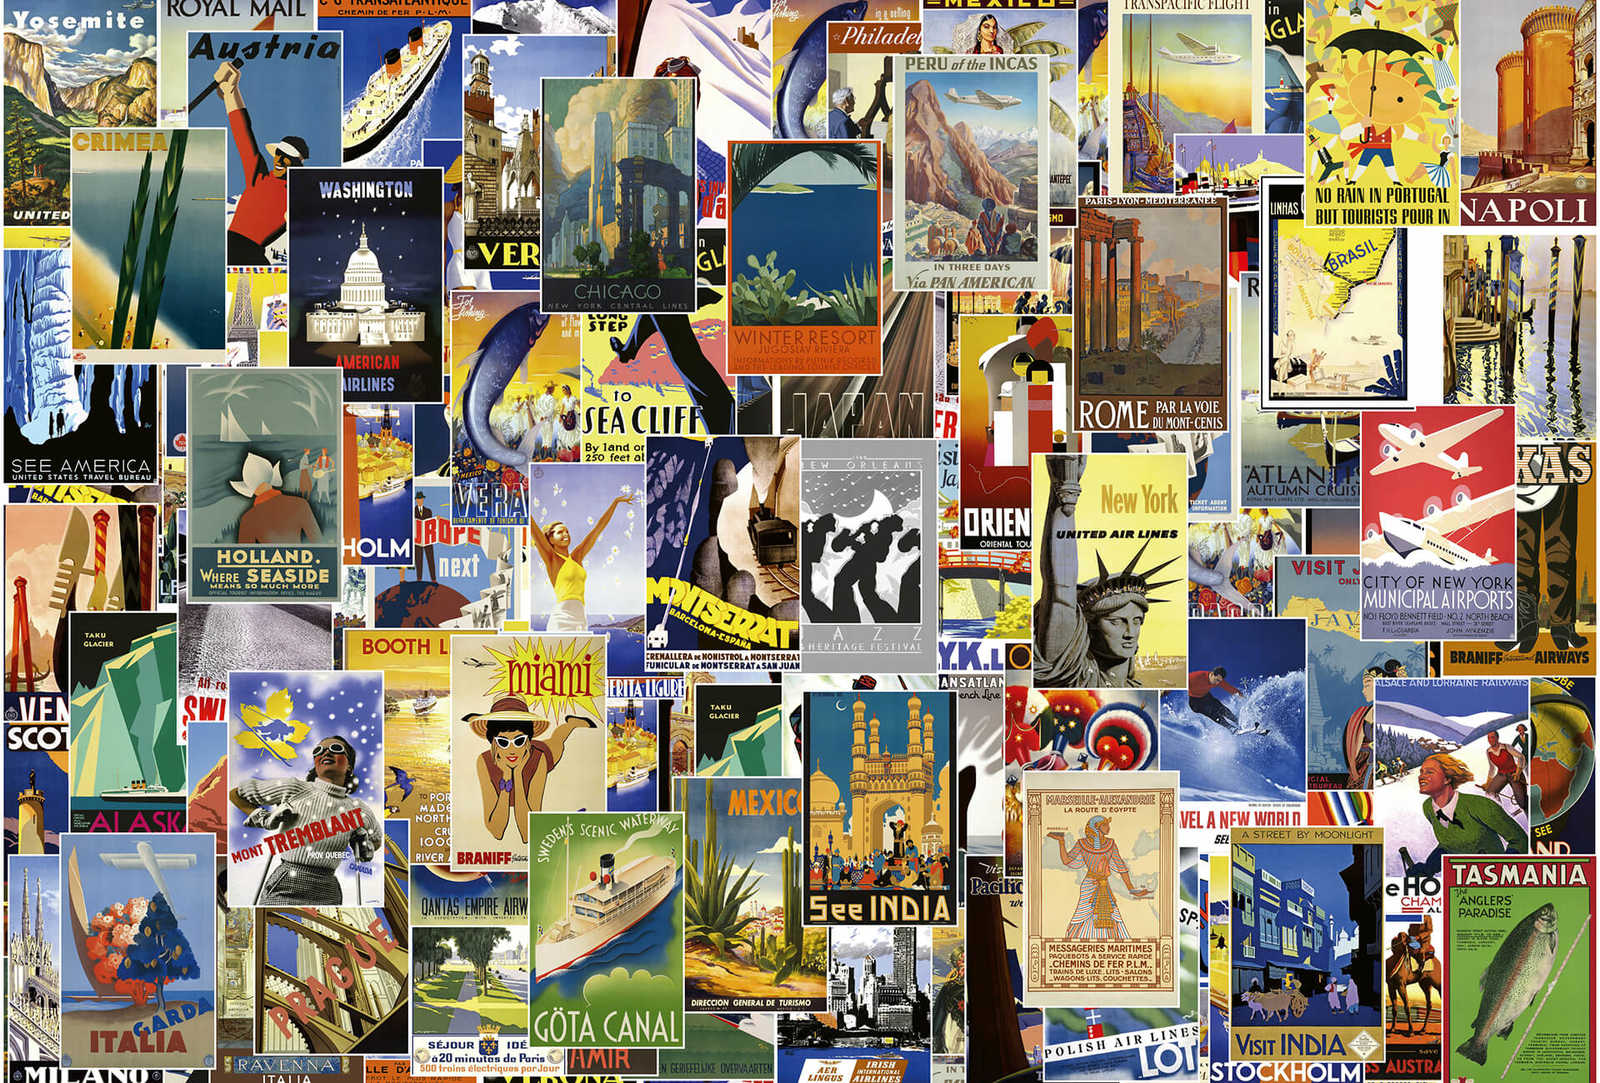         Vintage poster wall mural with travel motifs - Colorful
    